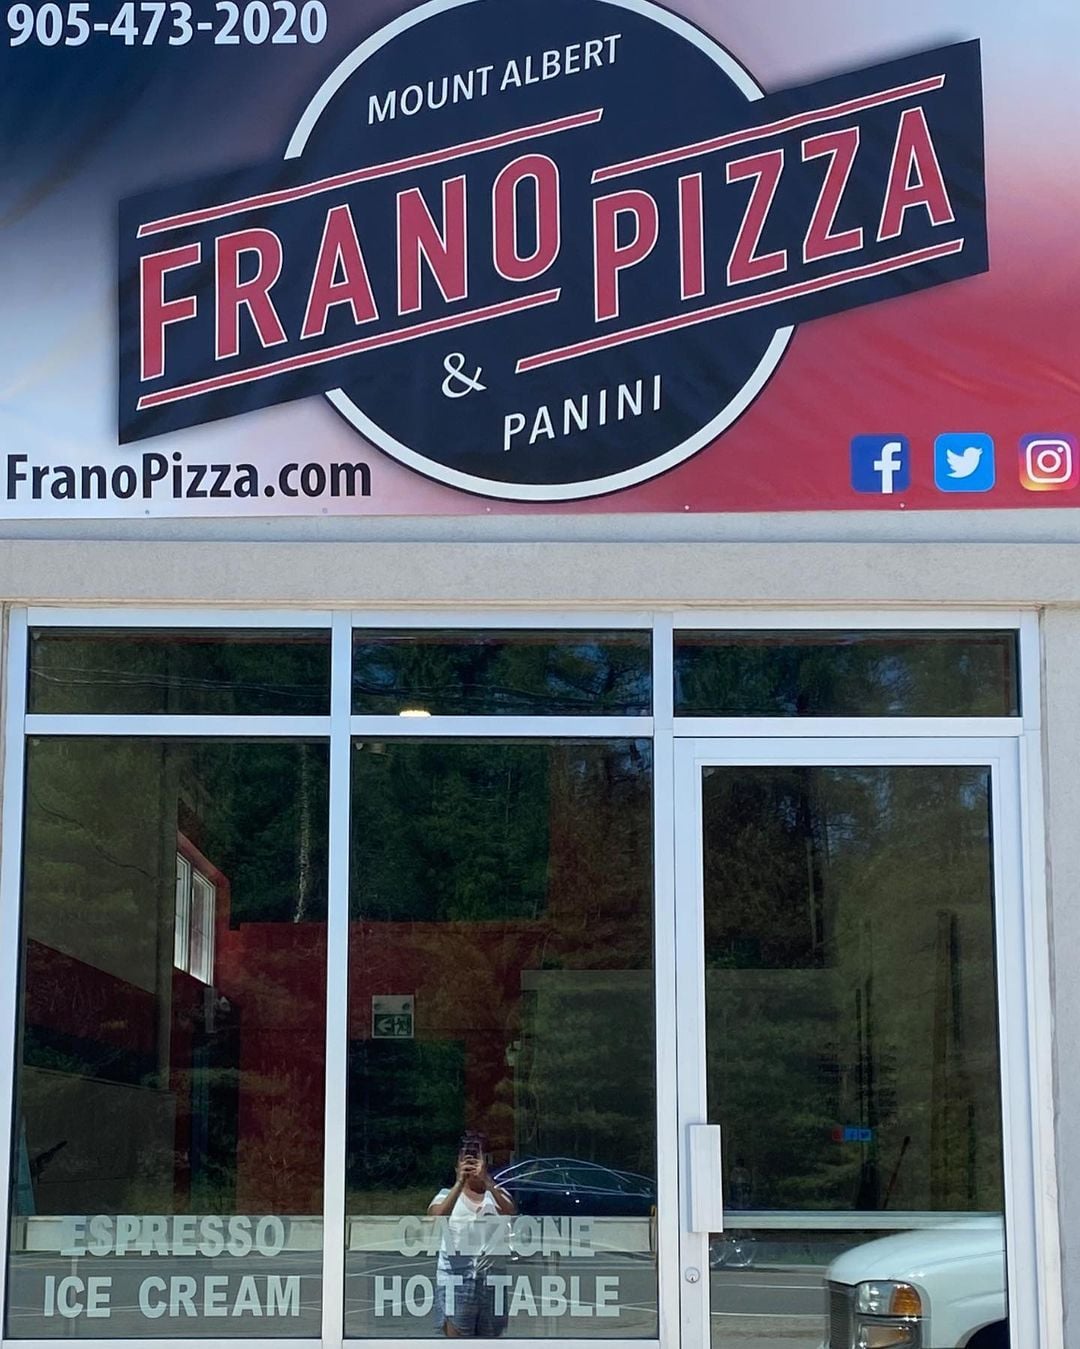 Frano Pizza and Panini storefront